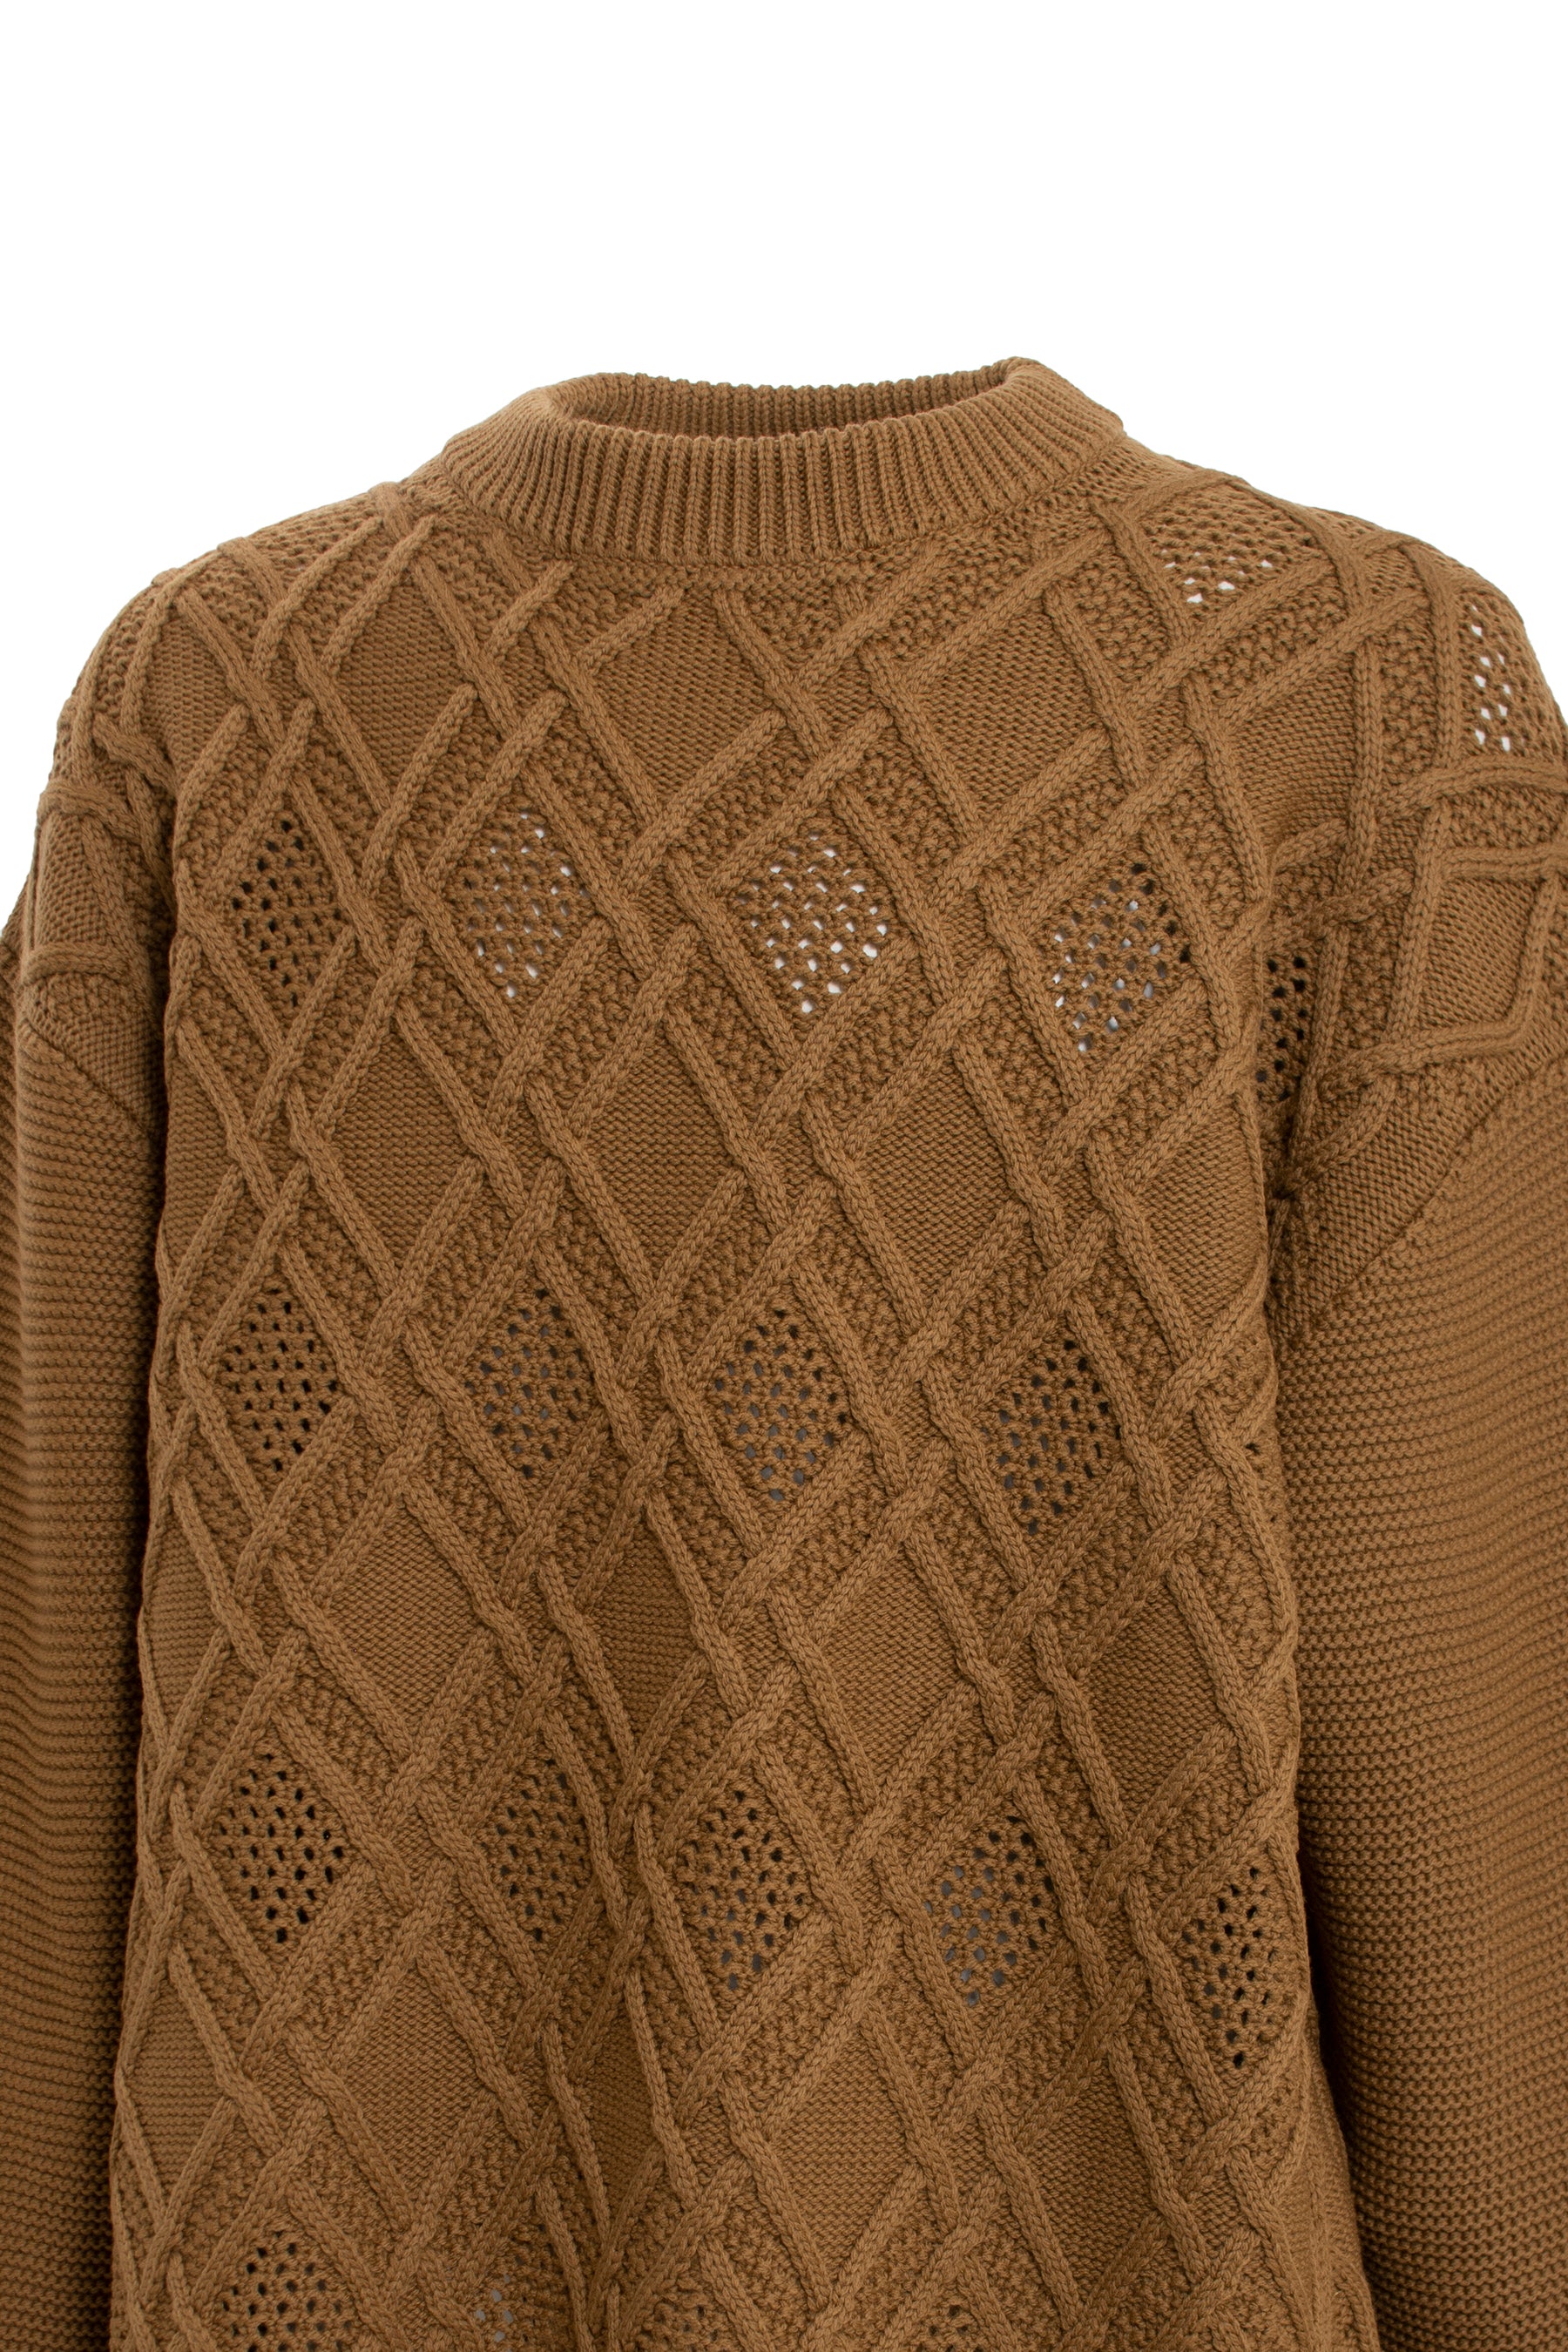 GRATE TEX MESH KNIT PULLOVER / BRW